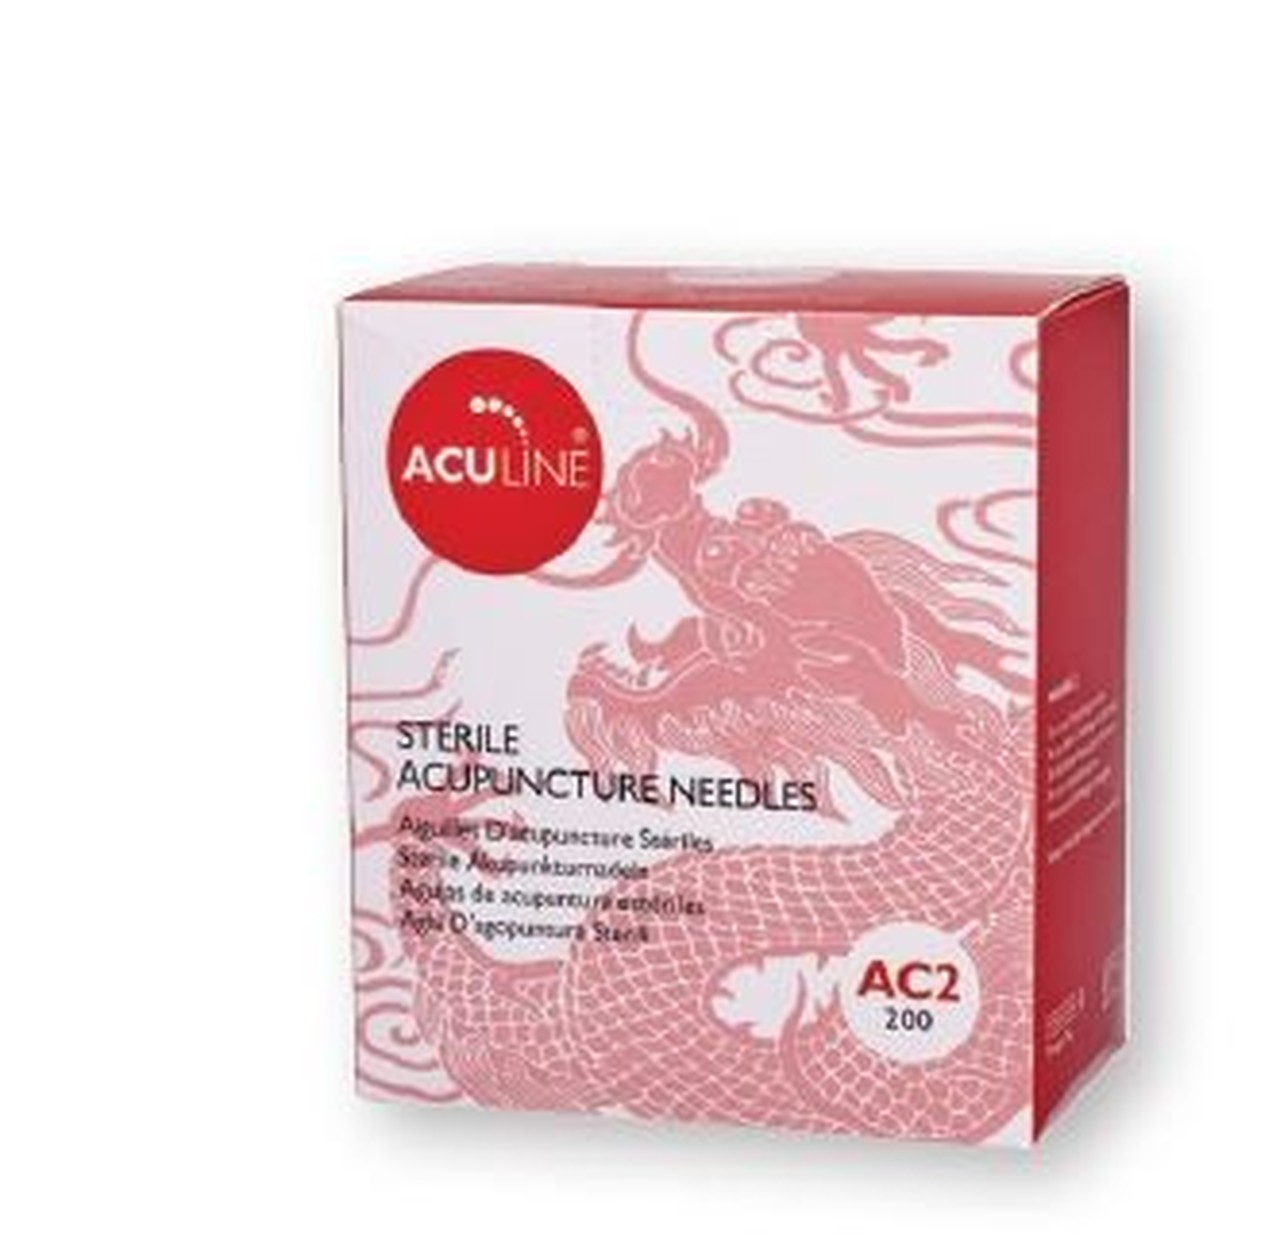 .30x40mm - Aculine Copper Handle Acupuncture Needles